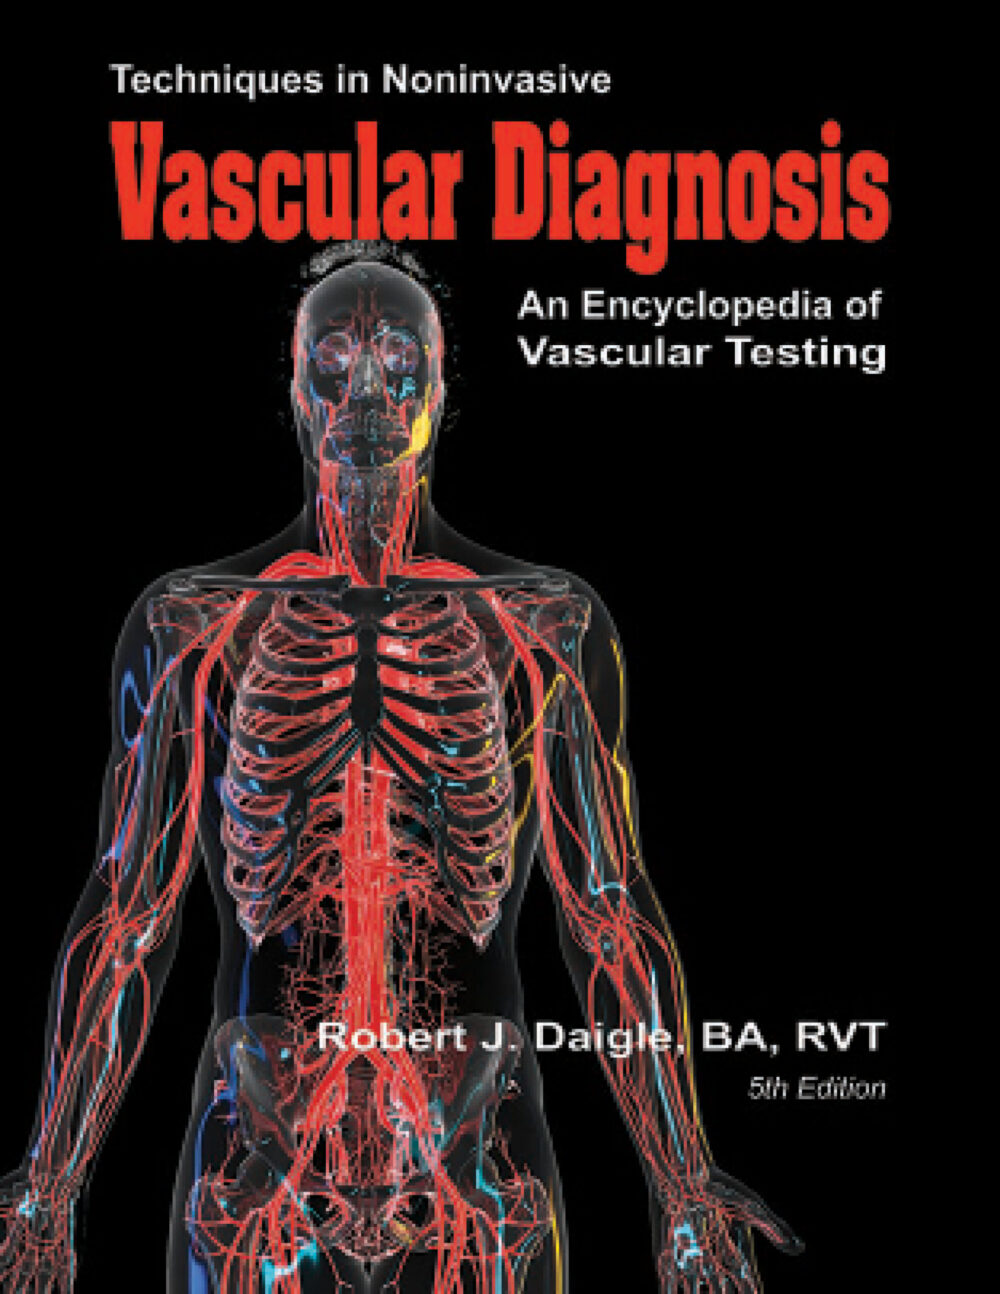 Techniques in Noninvasive Vascular Diagnosis: An Encyclopedia of Vascular Testing, 5th edition Fifth Ed